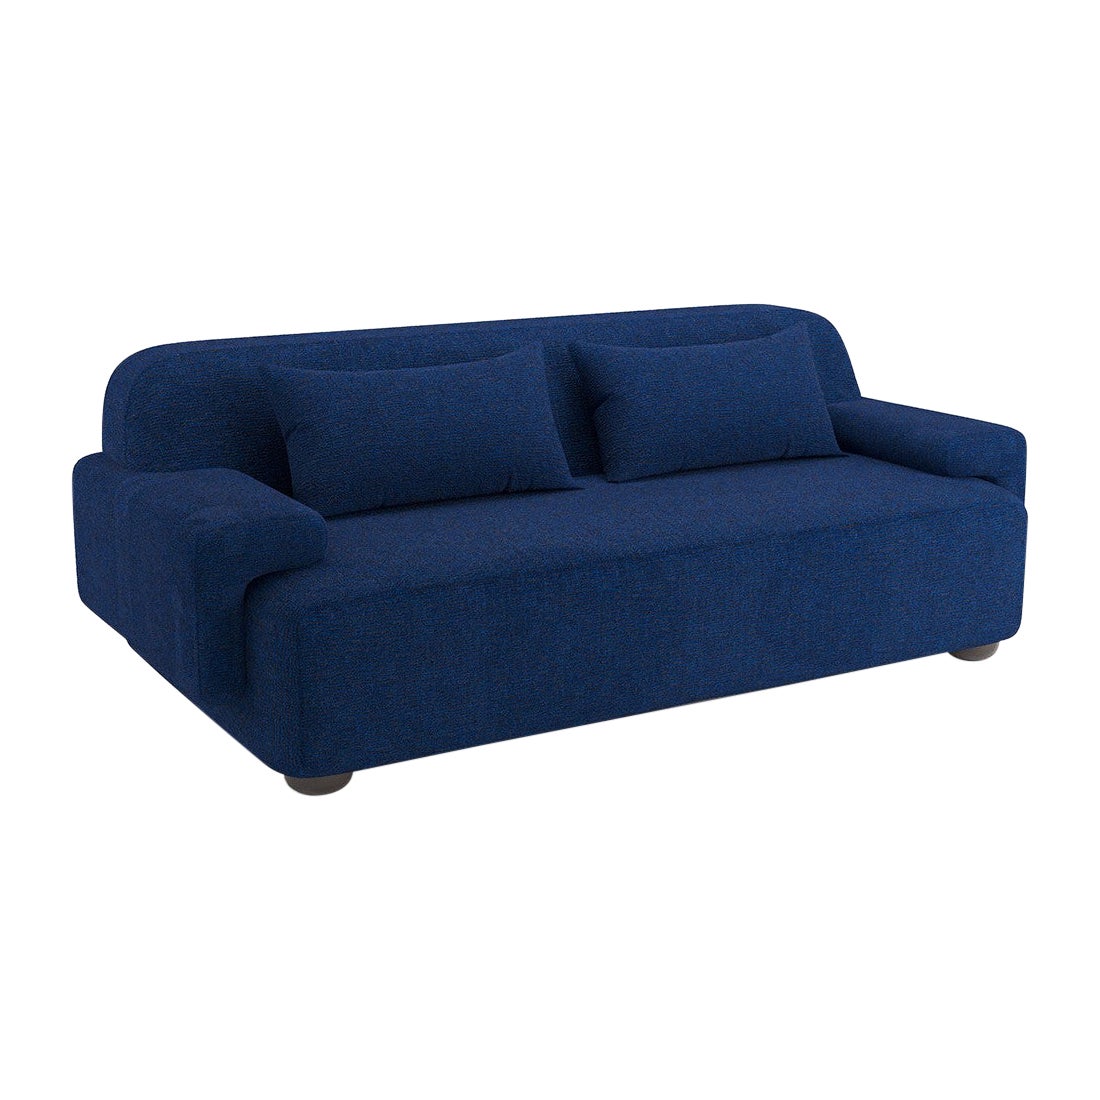 Popus Editions Lena 3 Seater Sofa in Ocean Megeve Fabric with Knit Effect